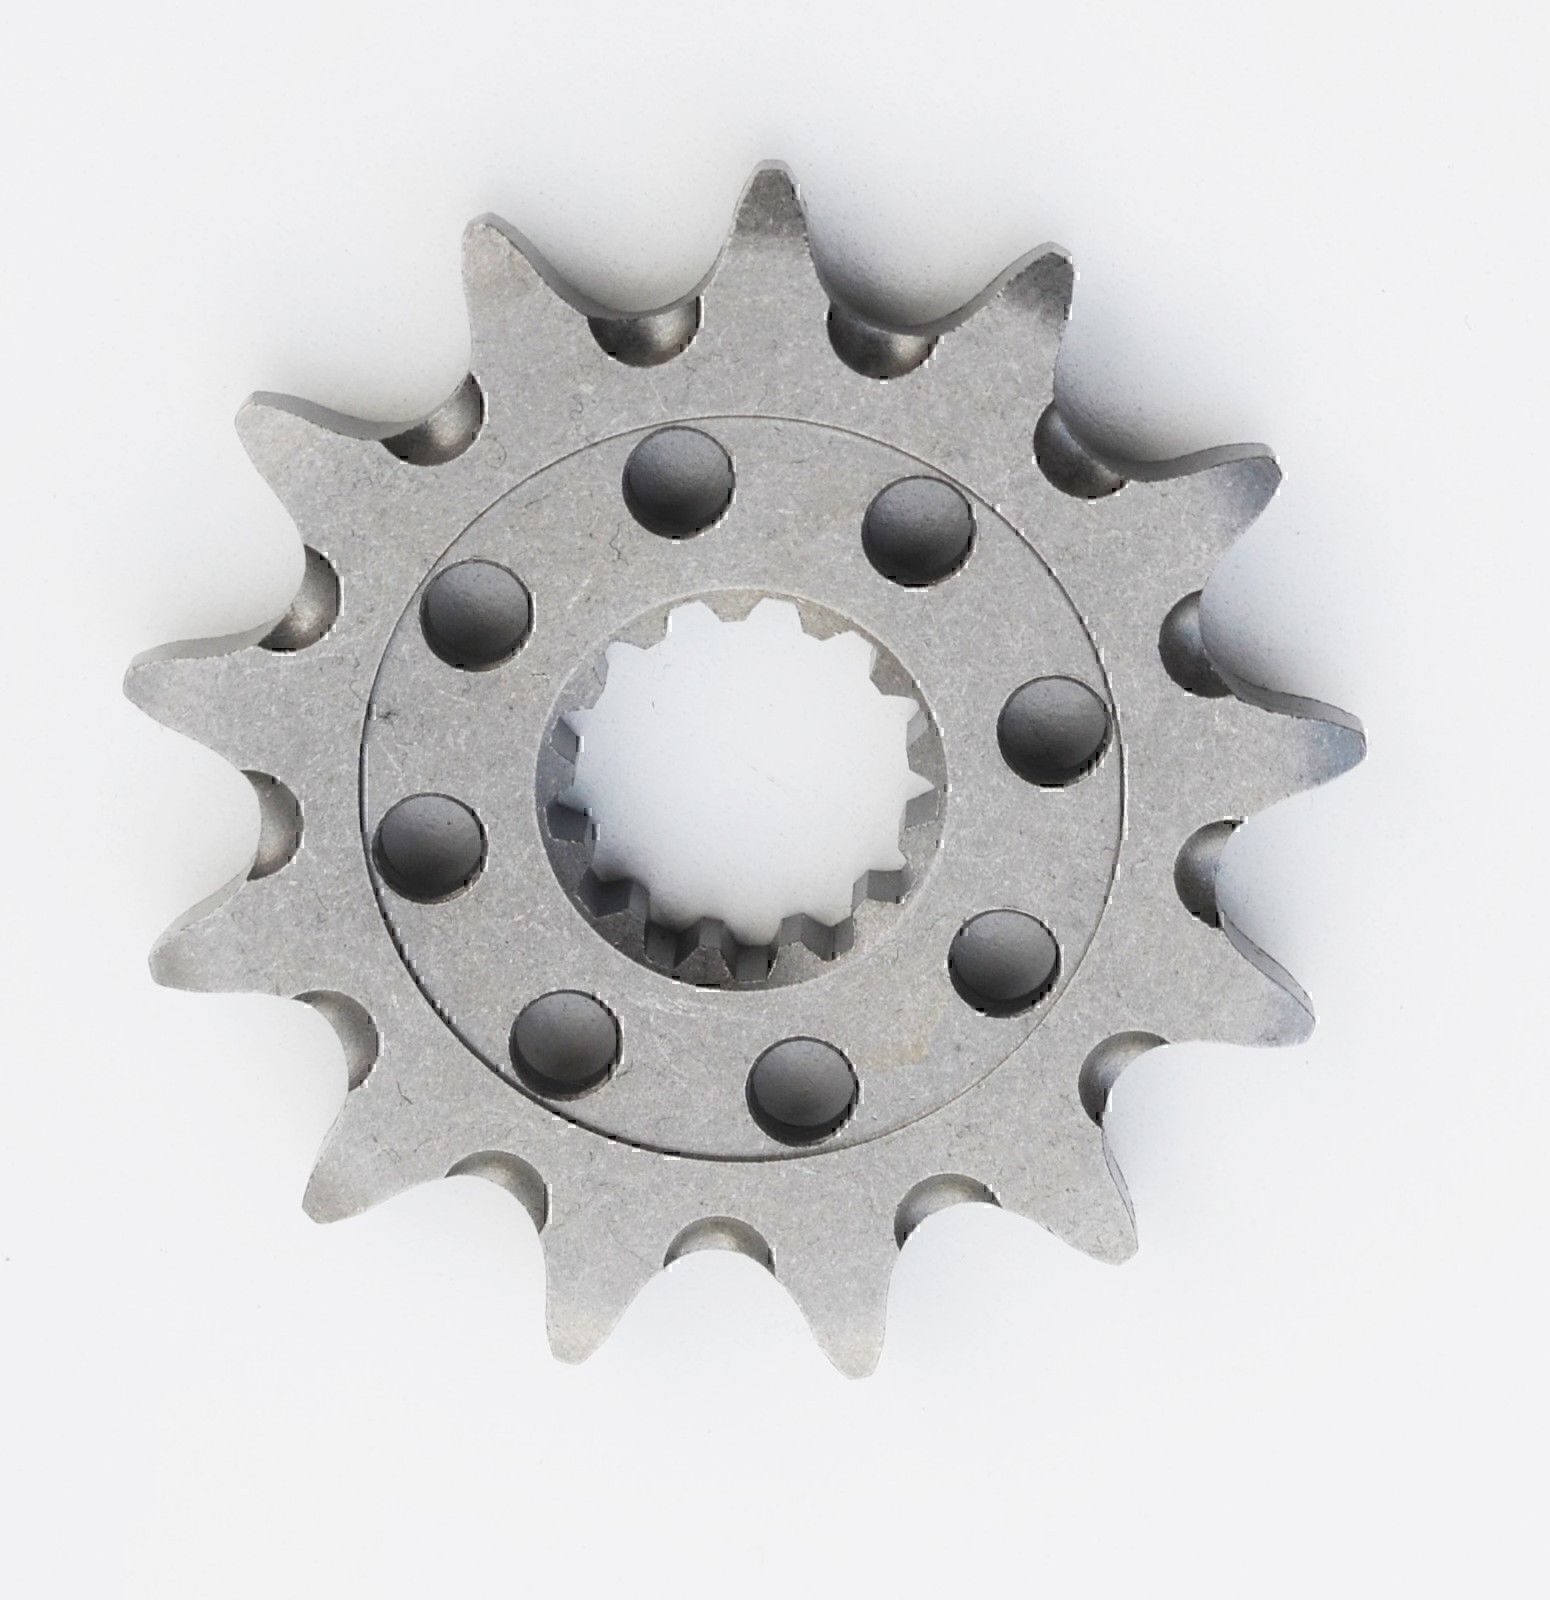 12 TOOTH FRONT SPROCKET FOR HONDA CR250 1988 - 2007 CRF450R/X 2002 - 2018 CR500 1988 - 2001